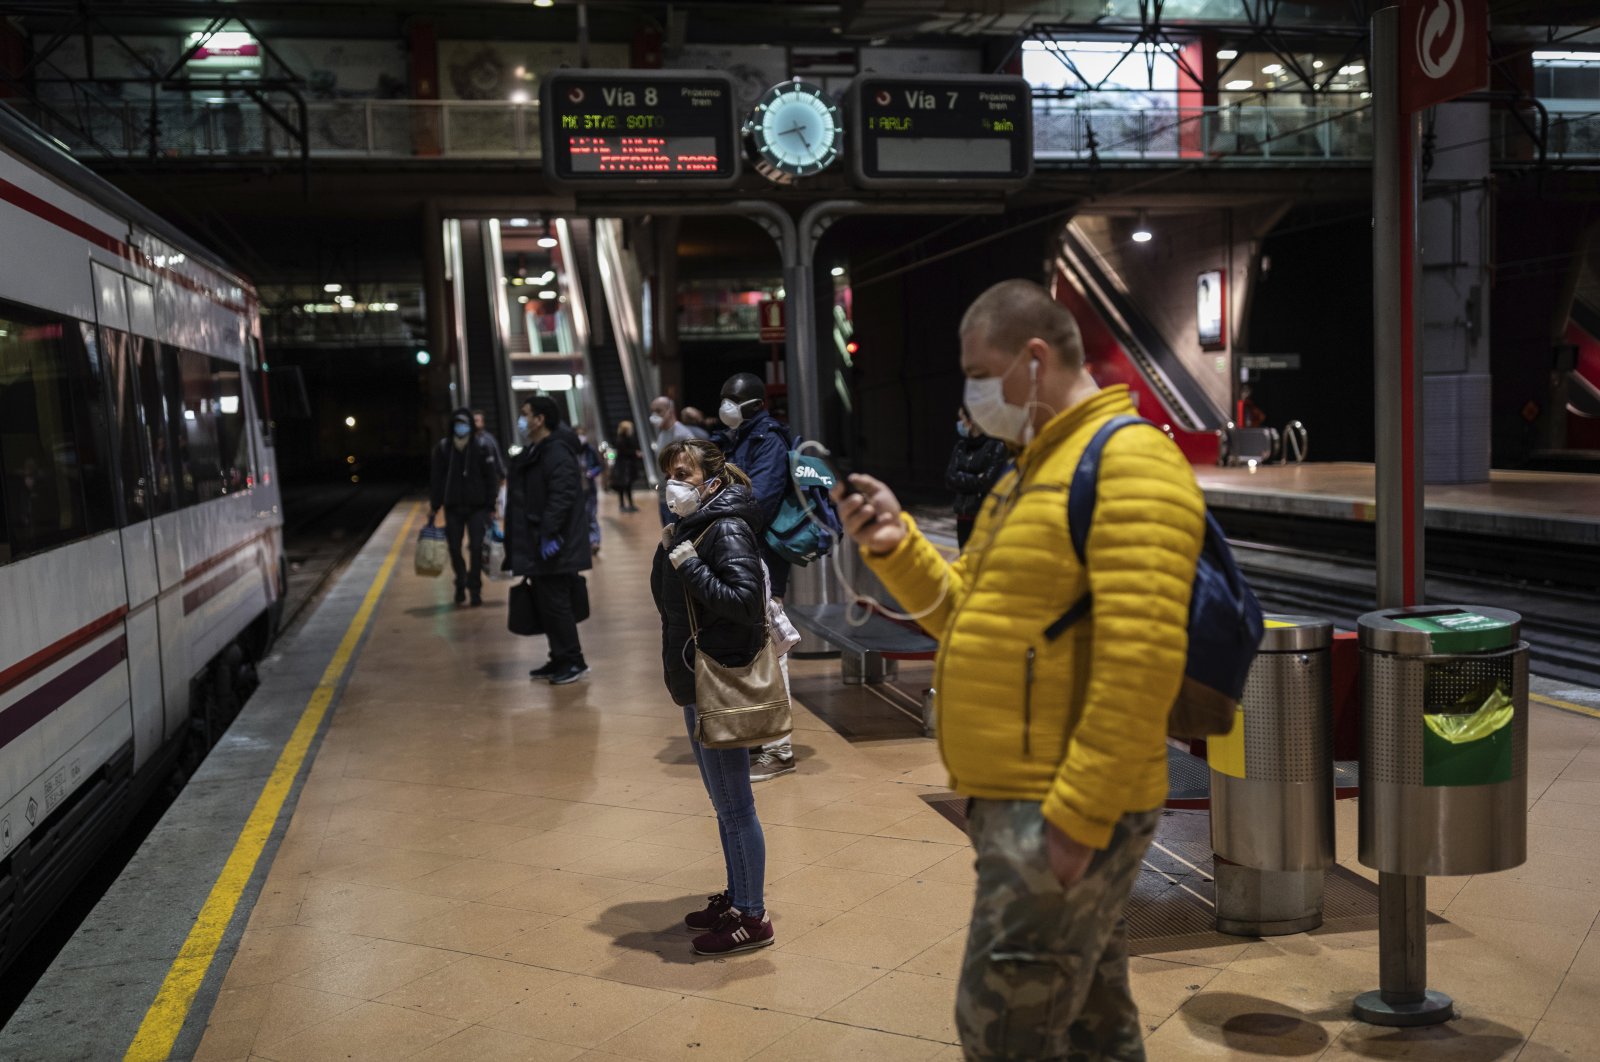 Commuters wear face masks to protect against the coronavirus while waiting on a platform at the Atocha train station, Madrid, April 13, 2020. (AP Photo)